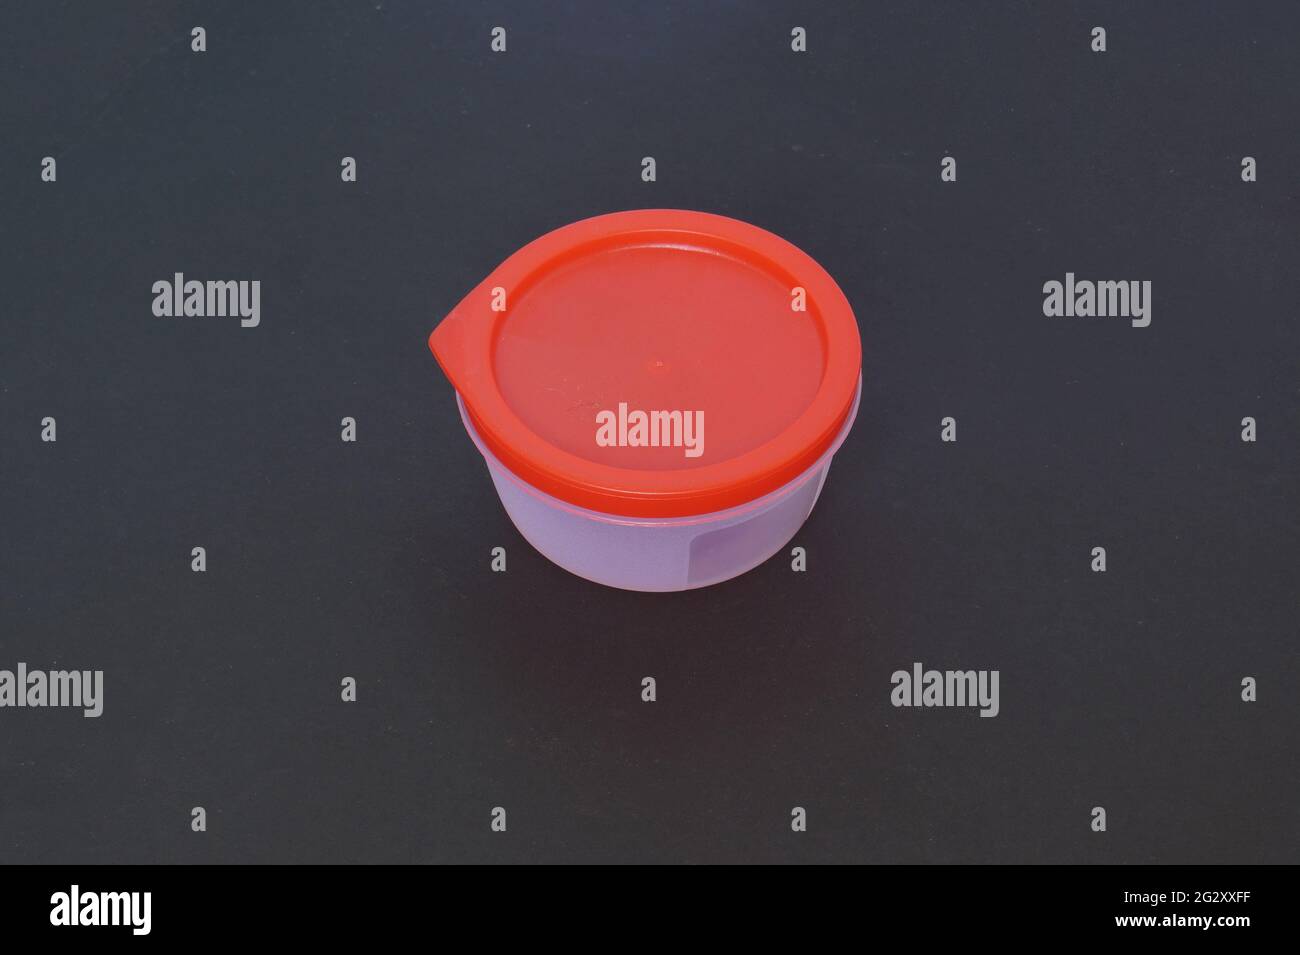 Round Plastic container in a dark background Stock Photo